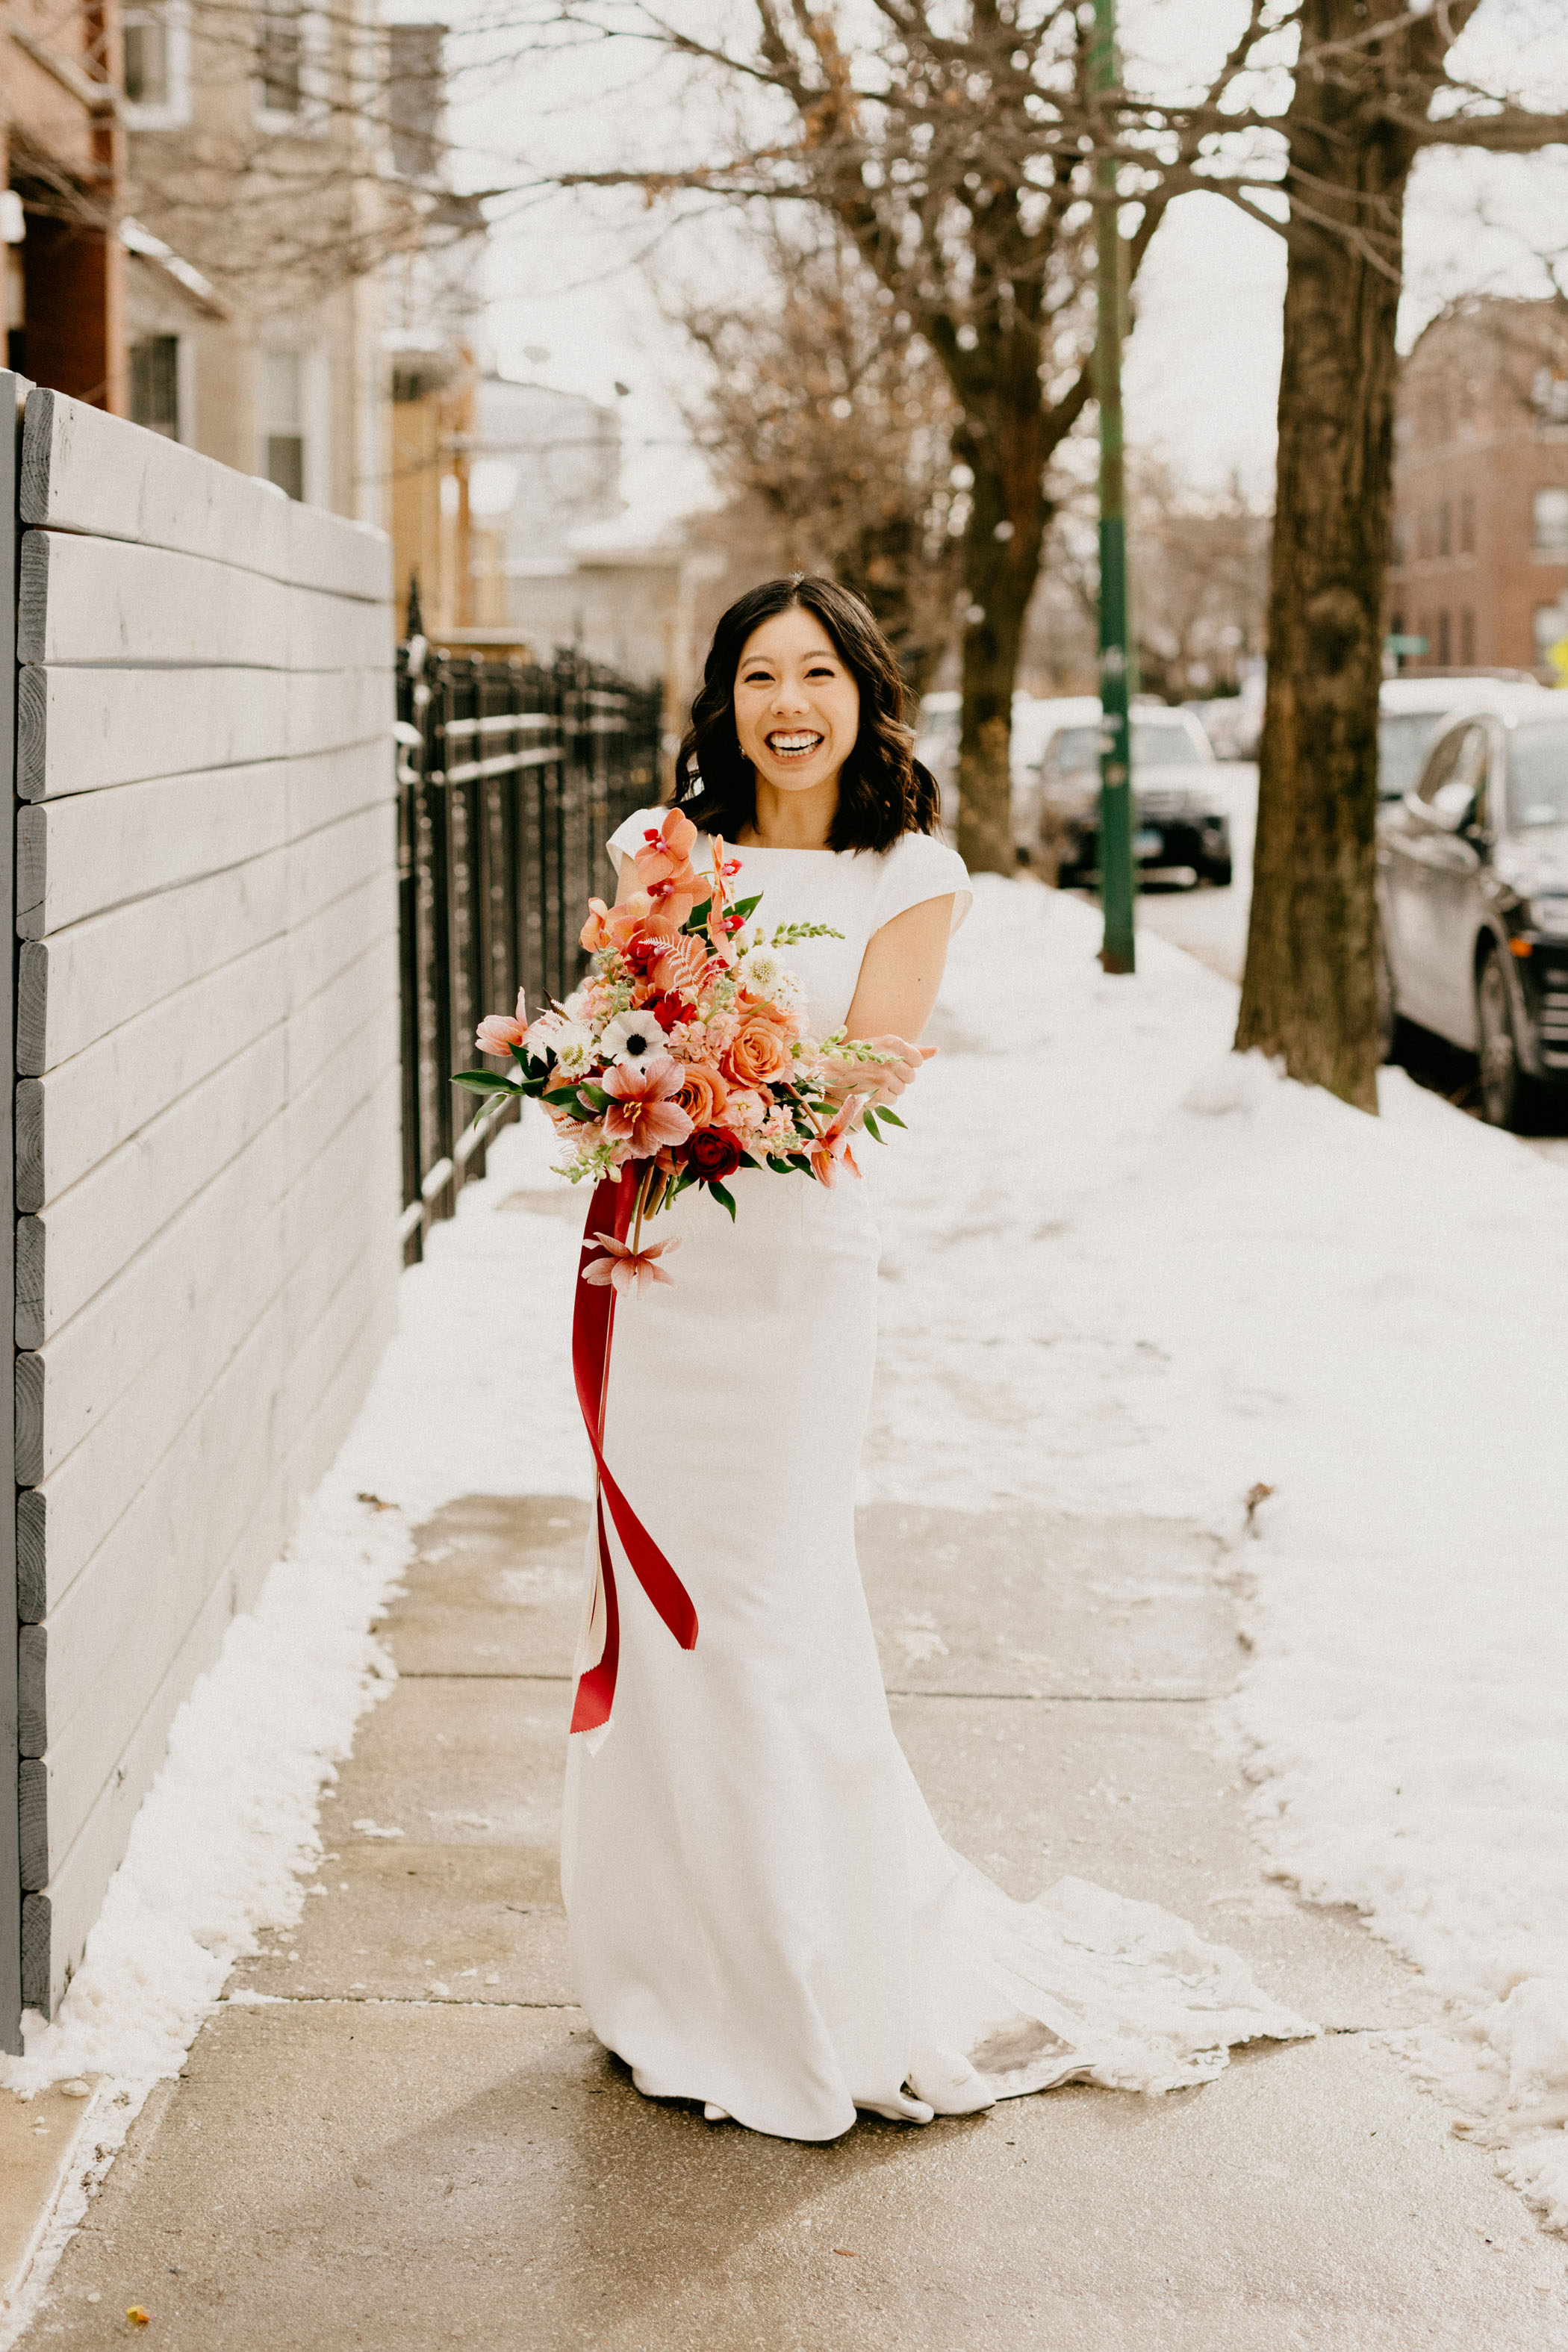 Bride in the snow holding bouquet